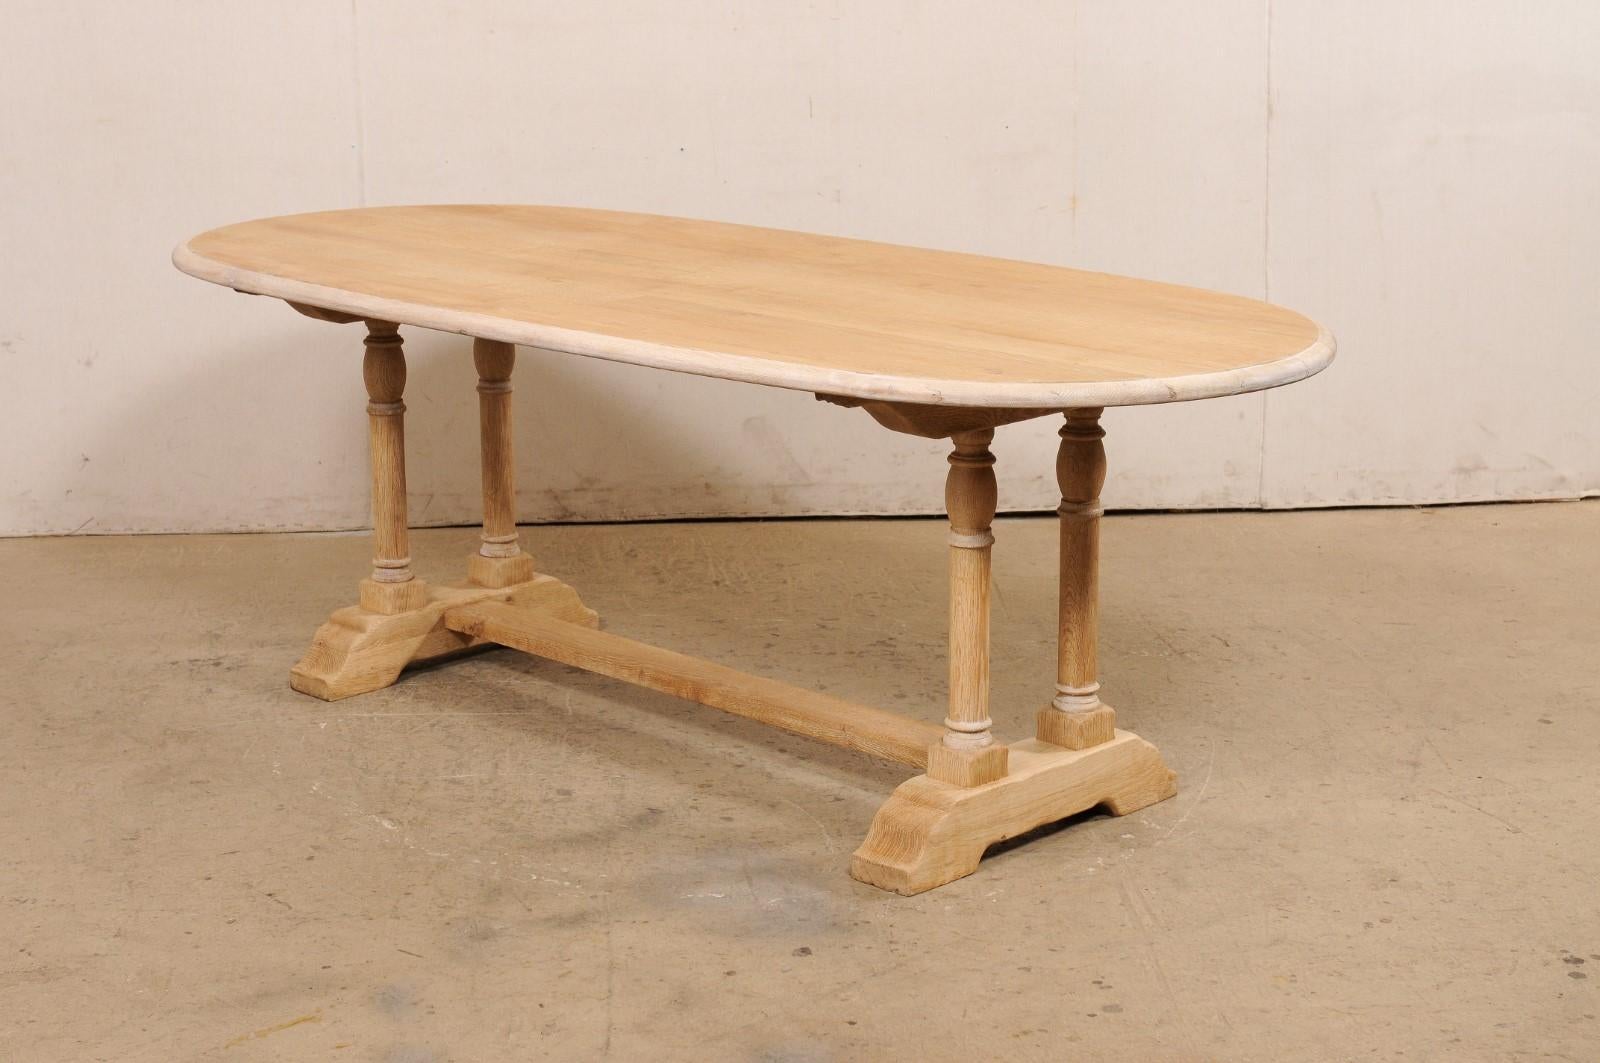 A French Oval-Shaped Bleached Wood Trestle Dining Table, Mid 20th Century For Sale 7